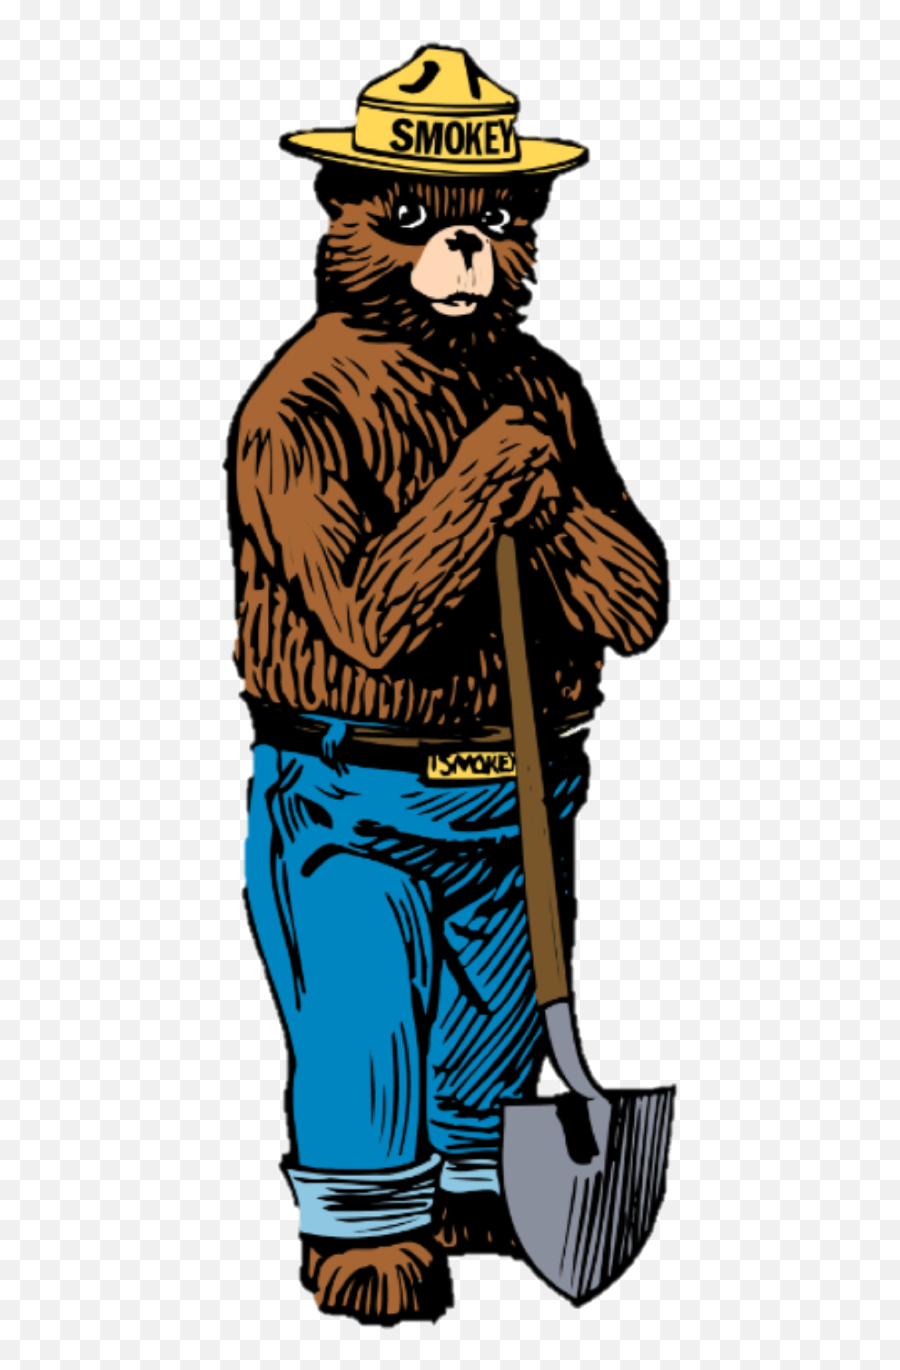 Smokey The Bear Us Forest Service Usfs - Only You Can Prevent Forest Fires Emoji,Us Forest Service Logo